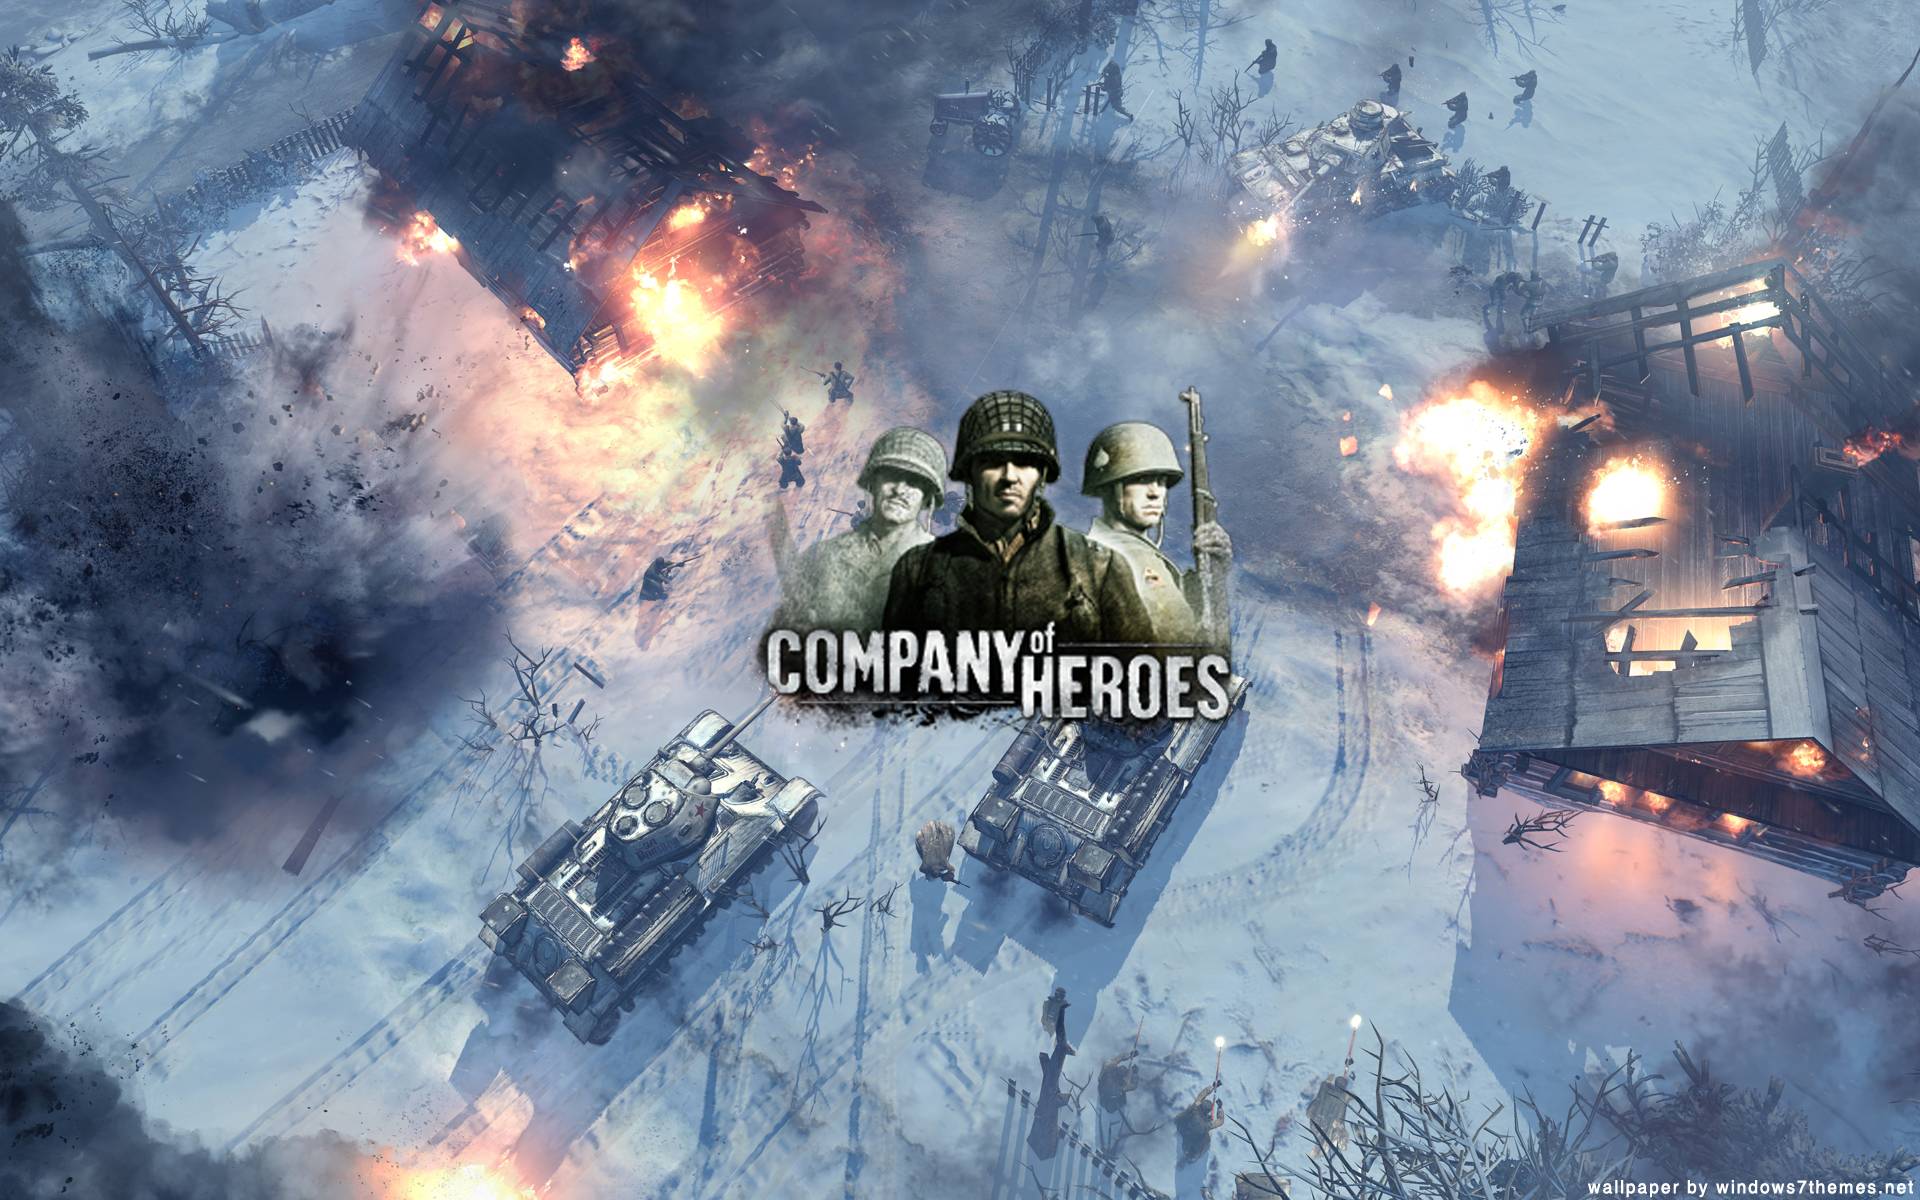 Company Of Heroes 2 Wallpaper in HD « GamingBolt.com: Video Game